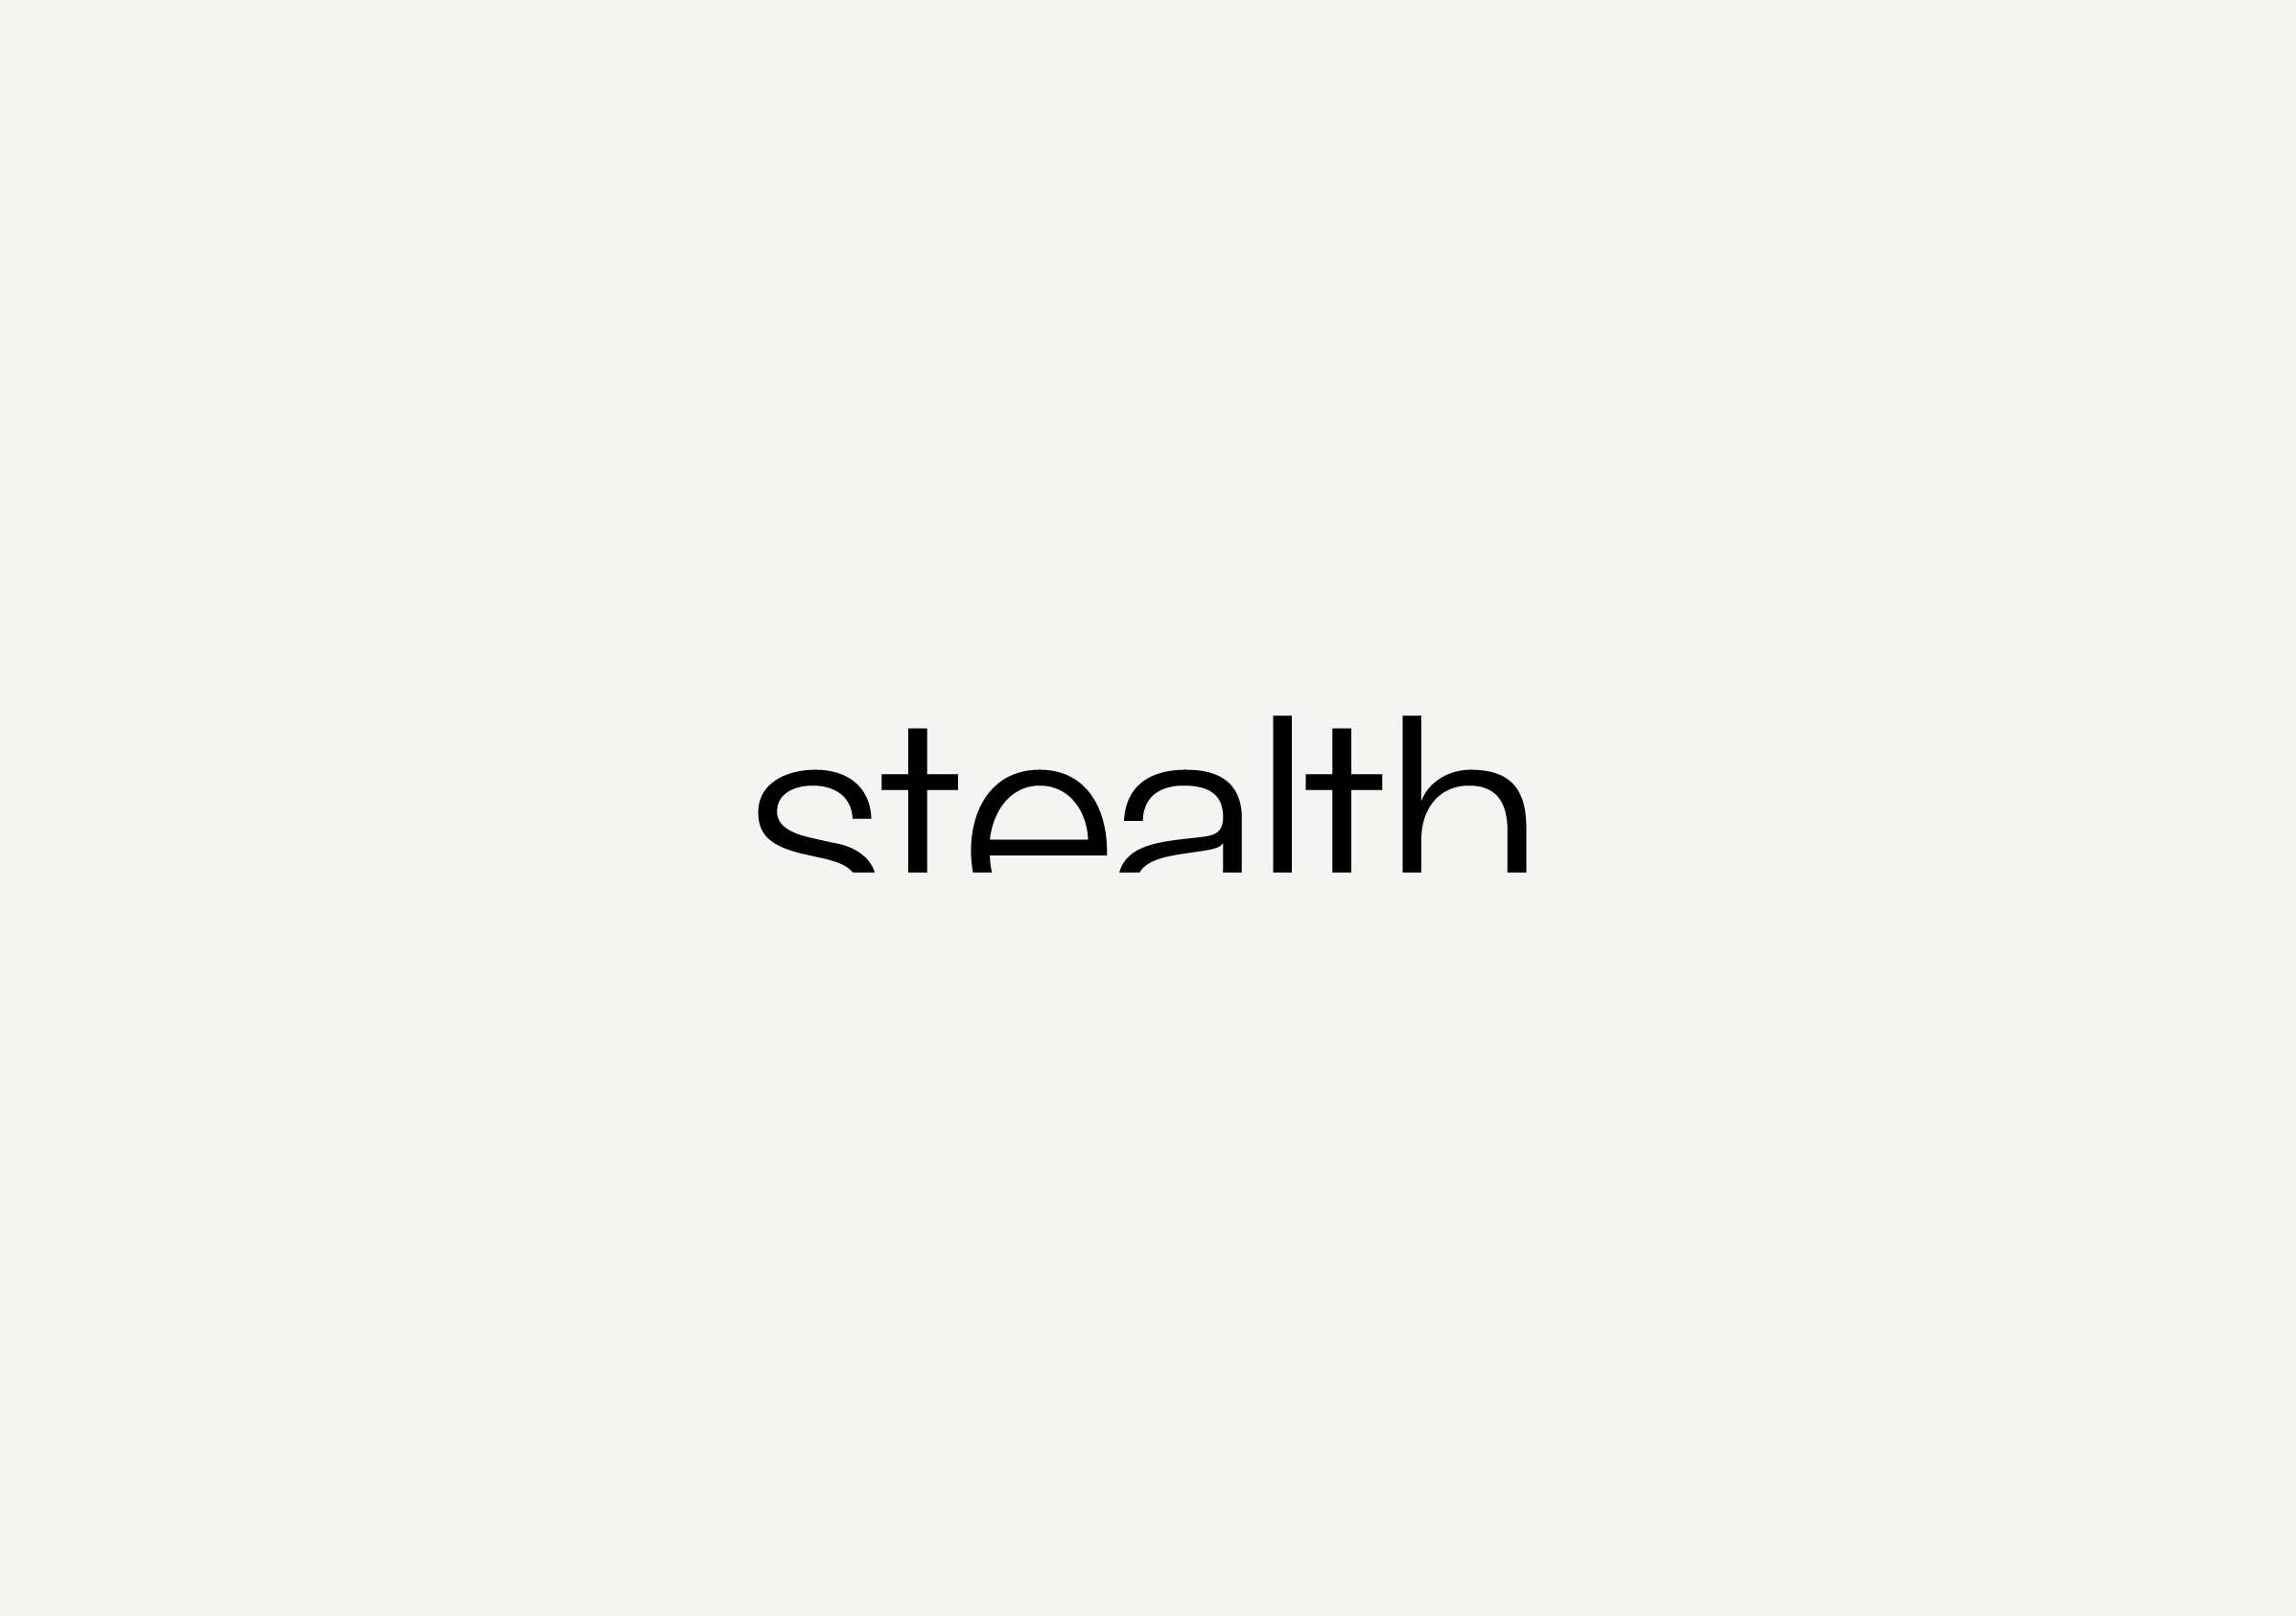 Stealth Security: Branding and logo design